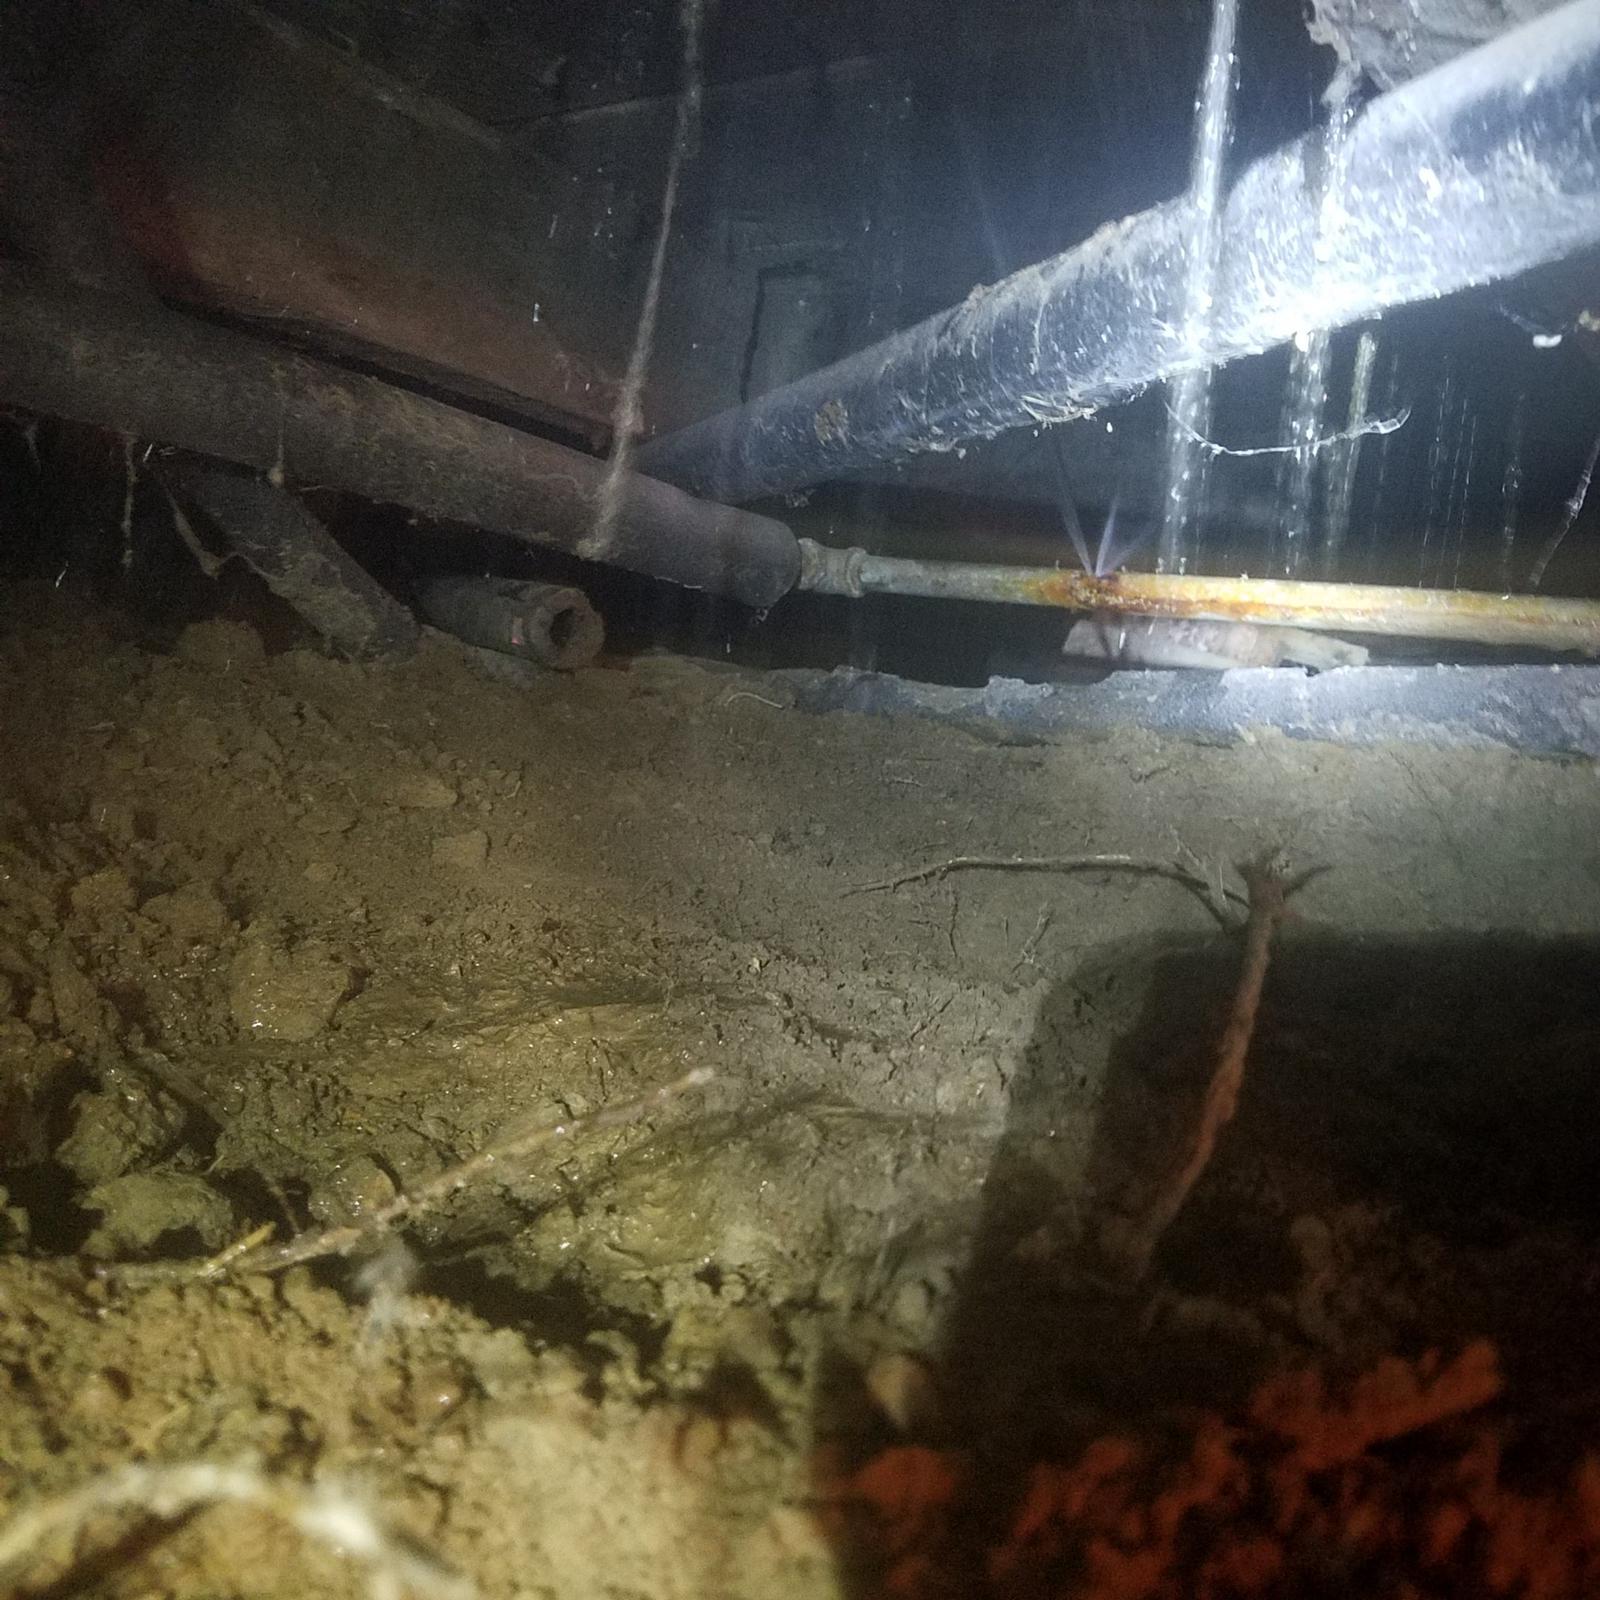 This is another typical water leak under a house (you can see water spraying.) Unfortunately all the water lines were rotten and we had to re-pipe all the water supplies with PEX, of course!